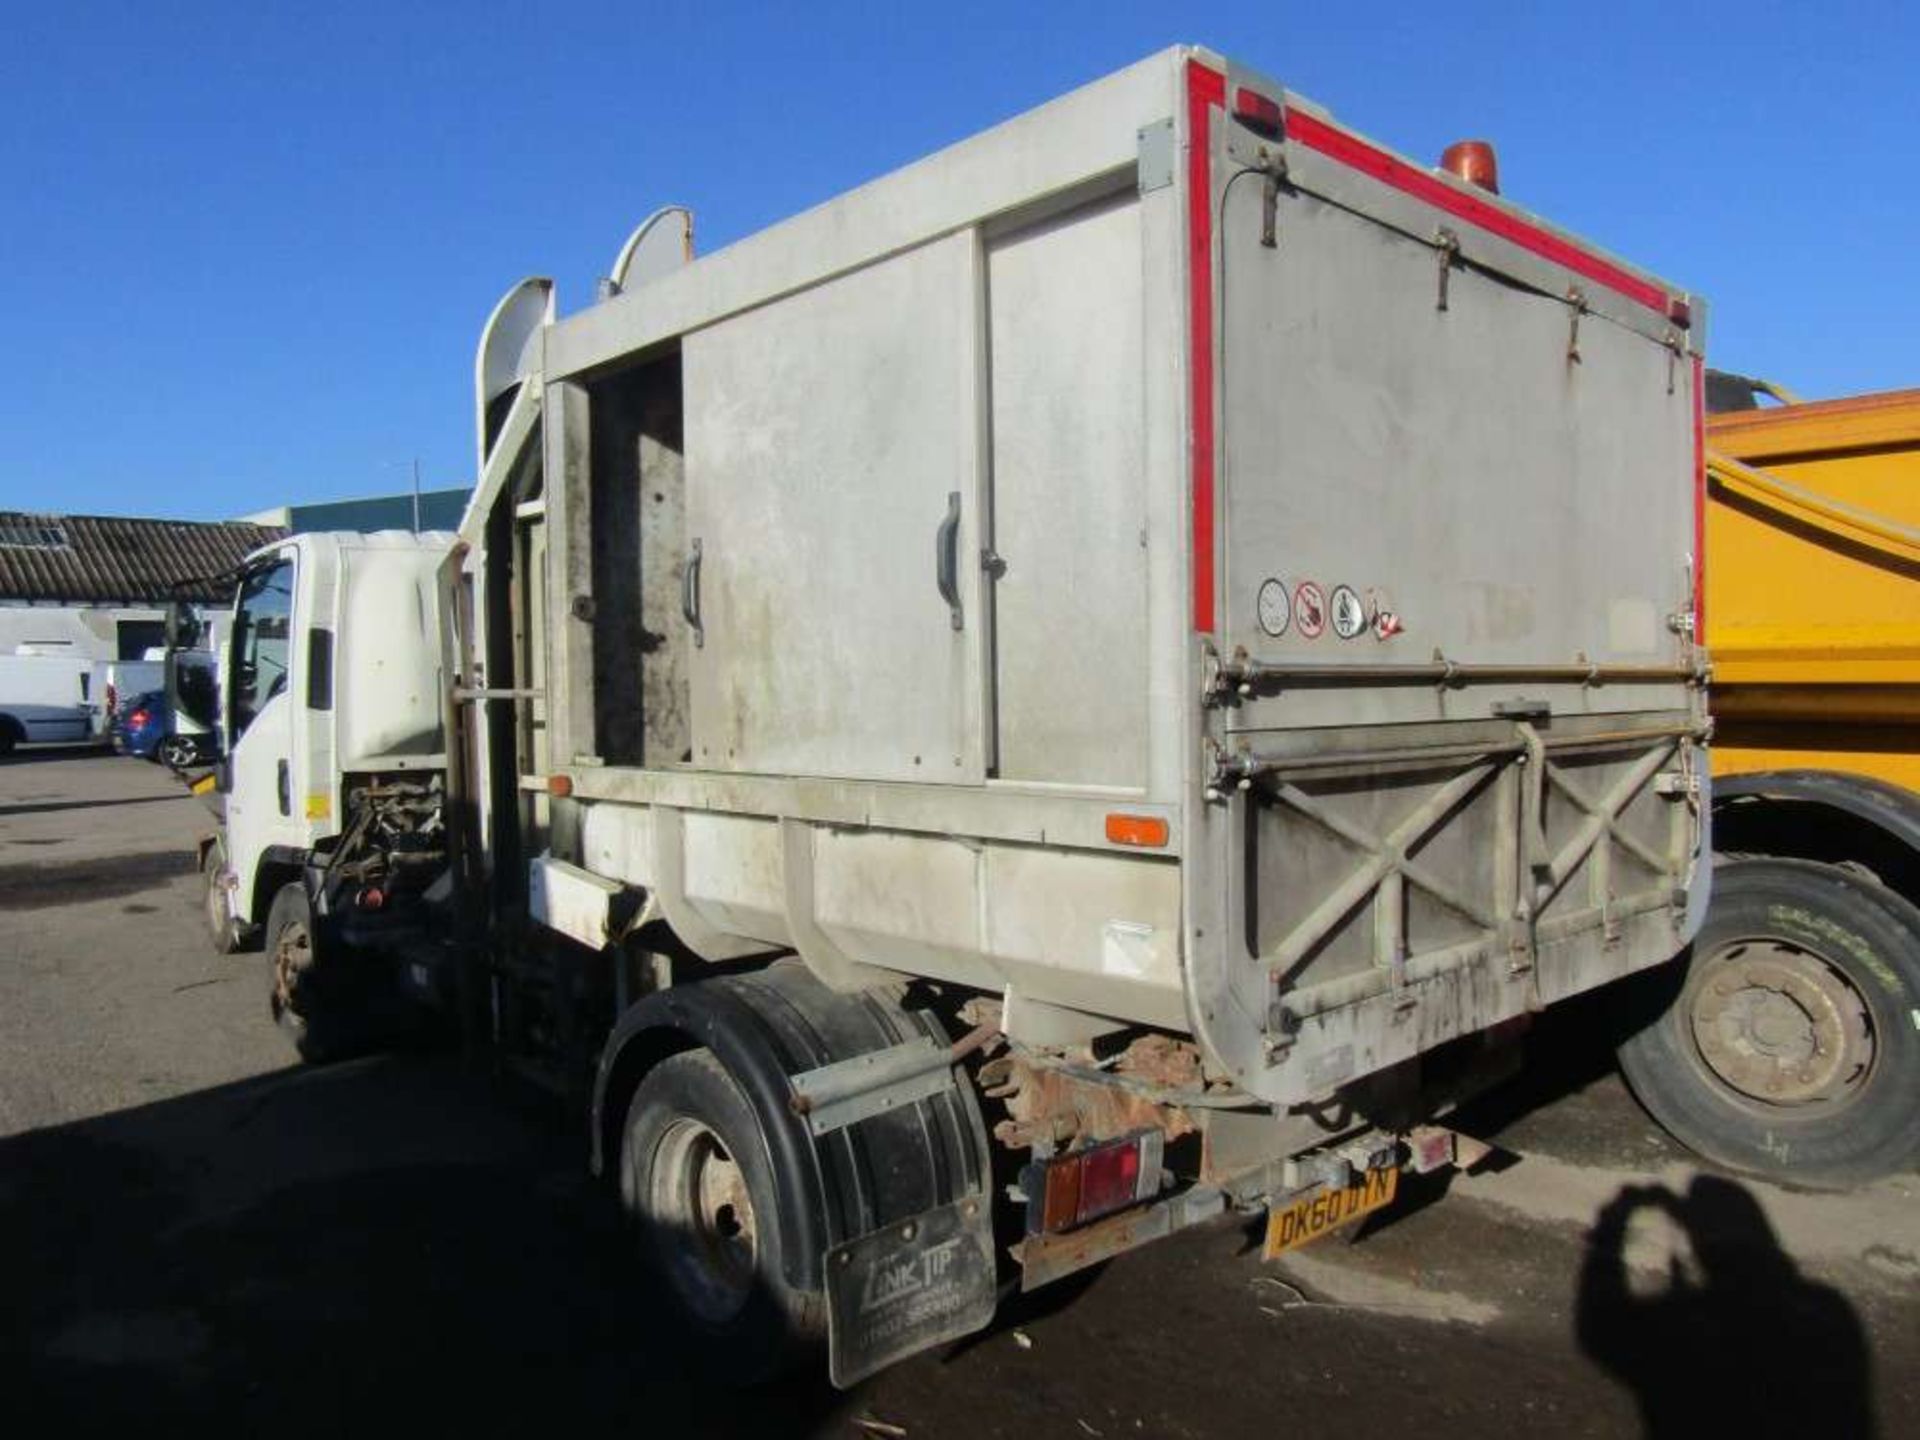 2010 60 reg Isuzu N75.190 Food Waste Collector with Link Tip Side Lifter (Direct Council) - Image 3 of 6